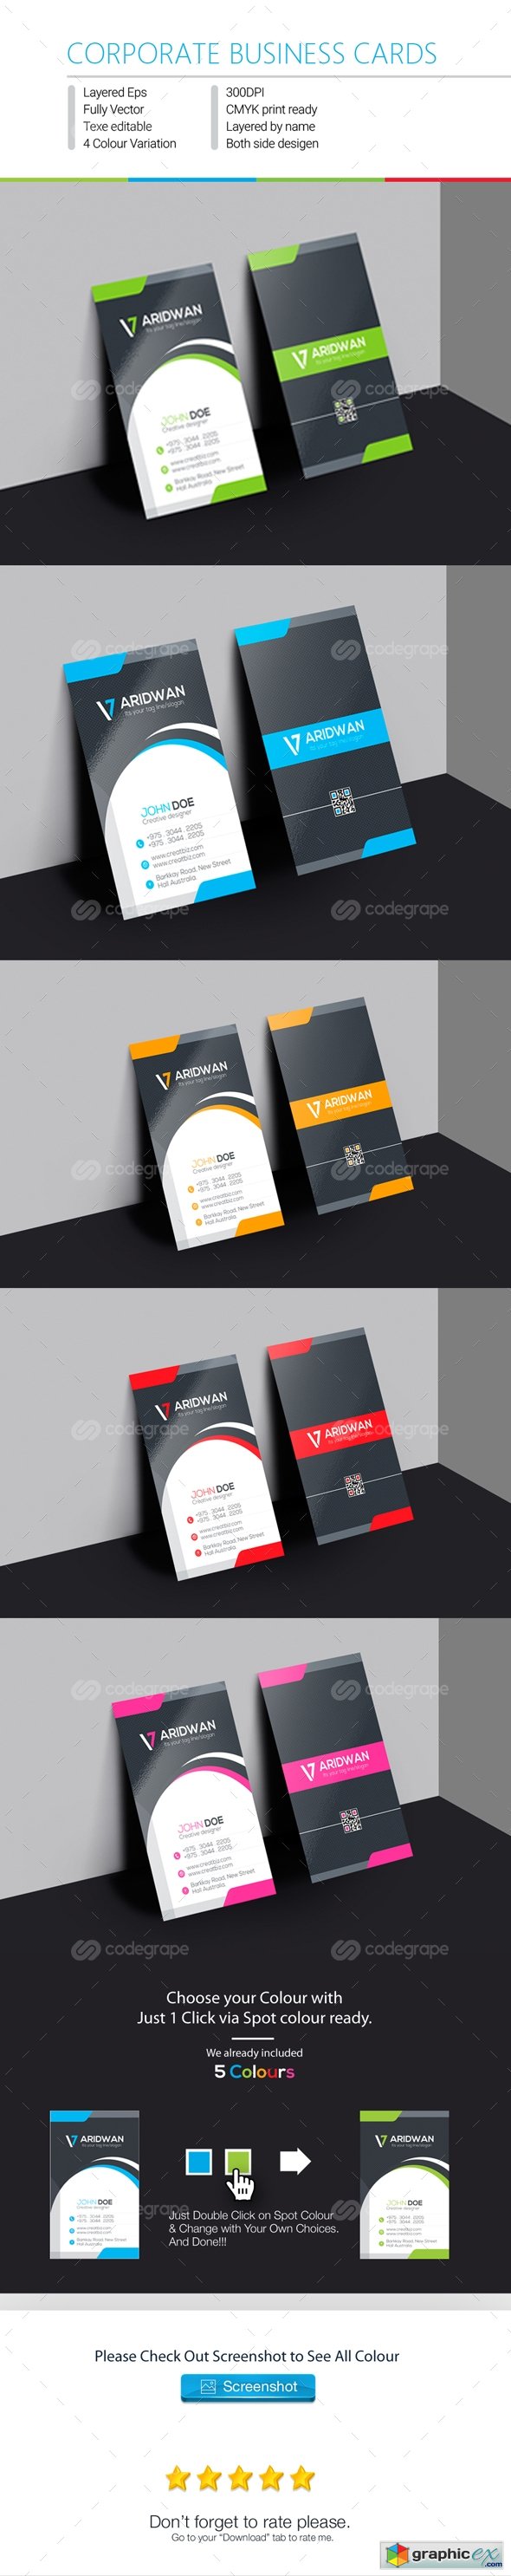 Corporate Business Cards 6249